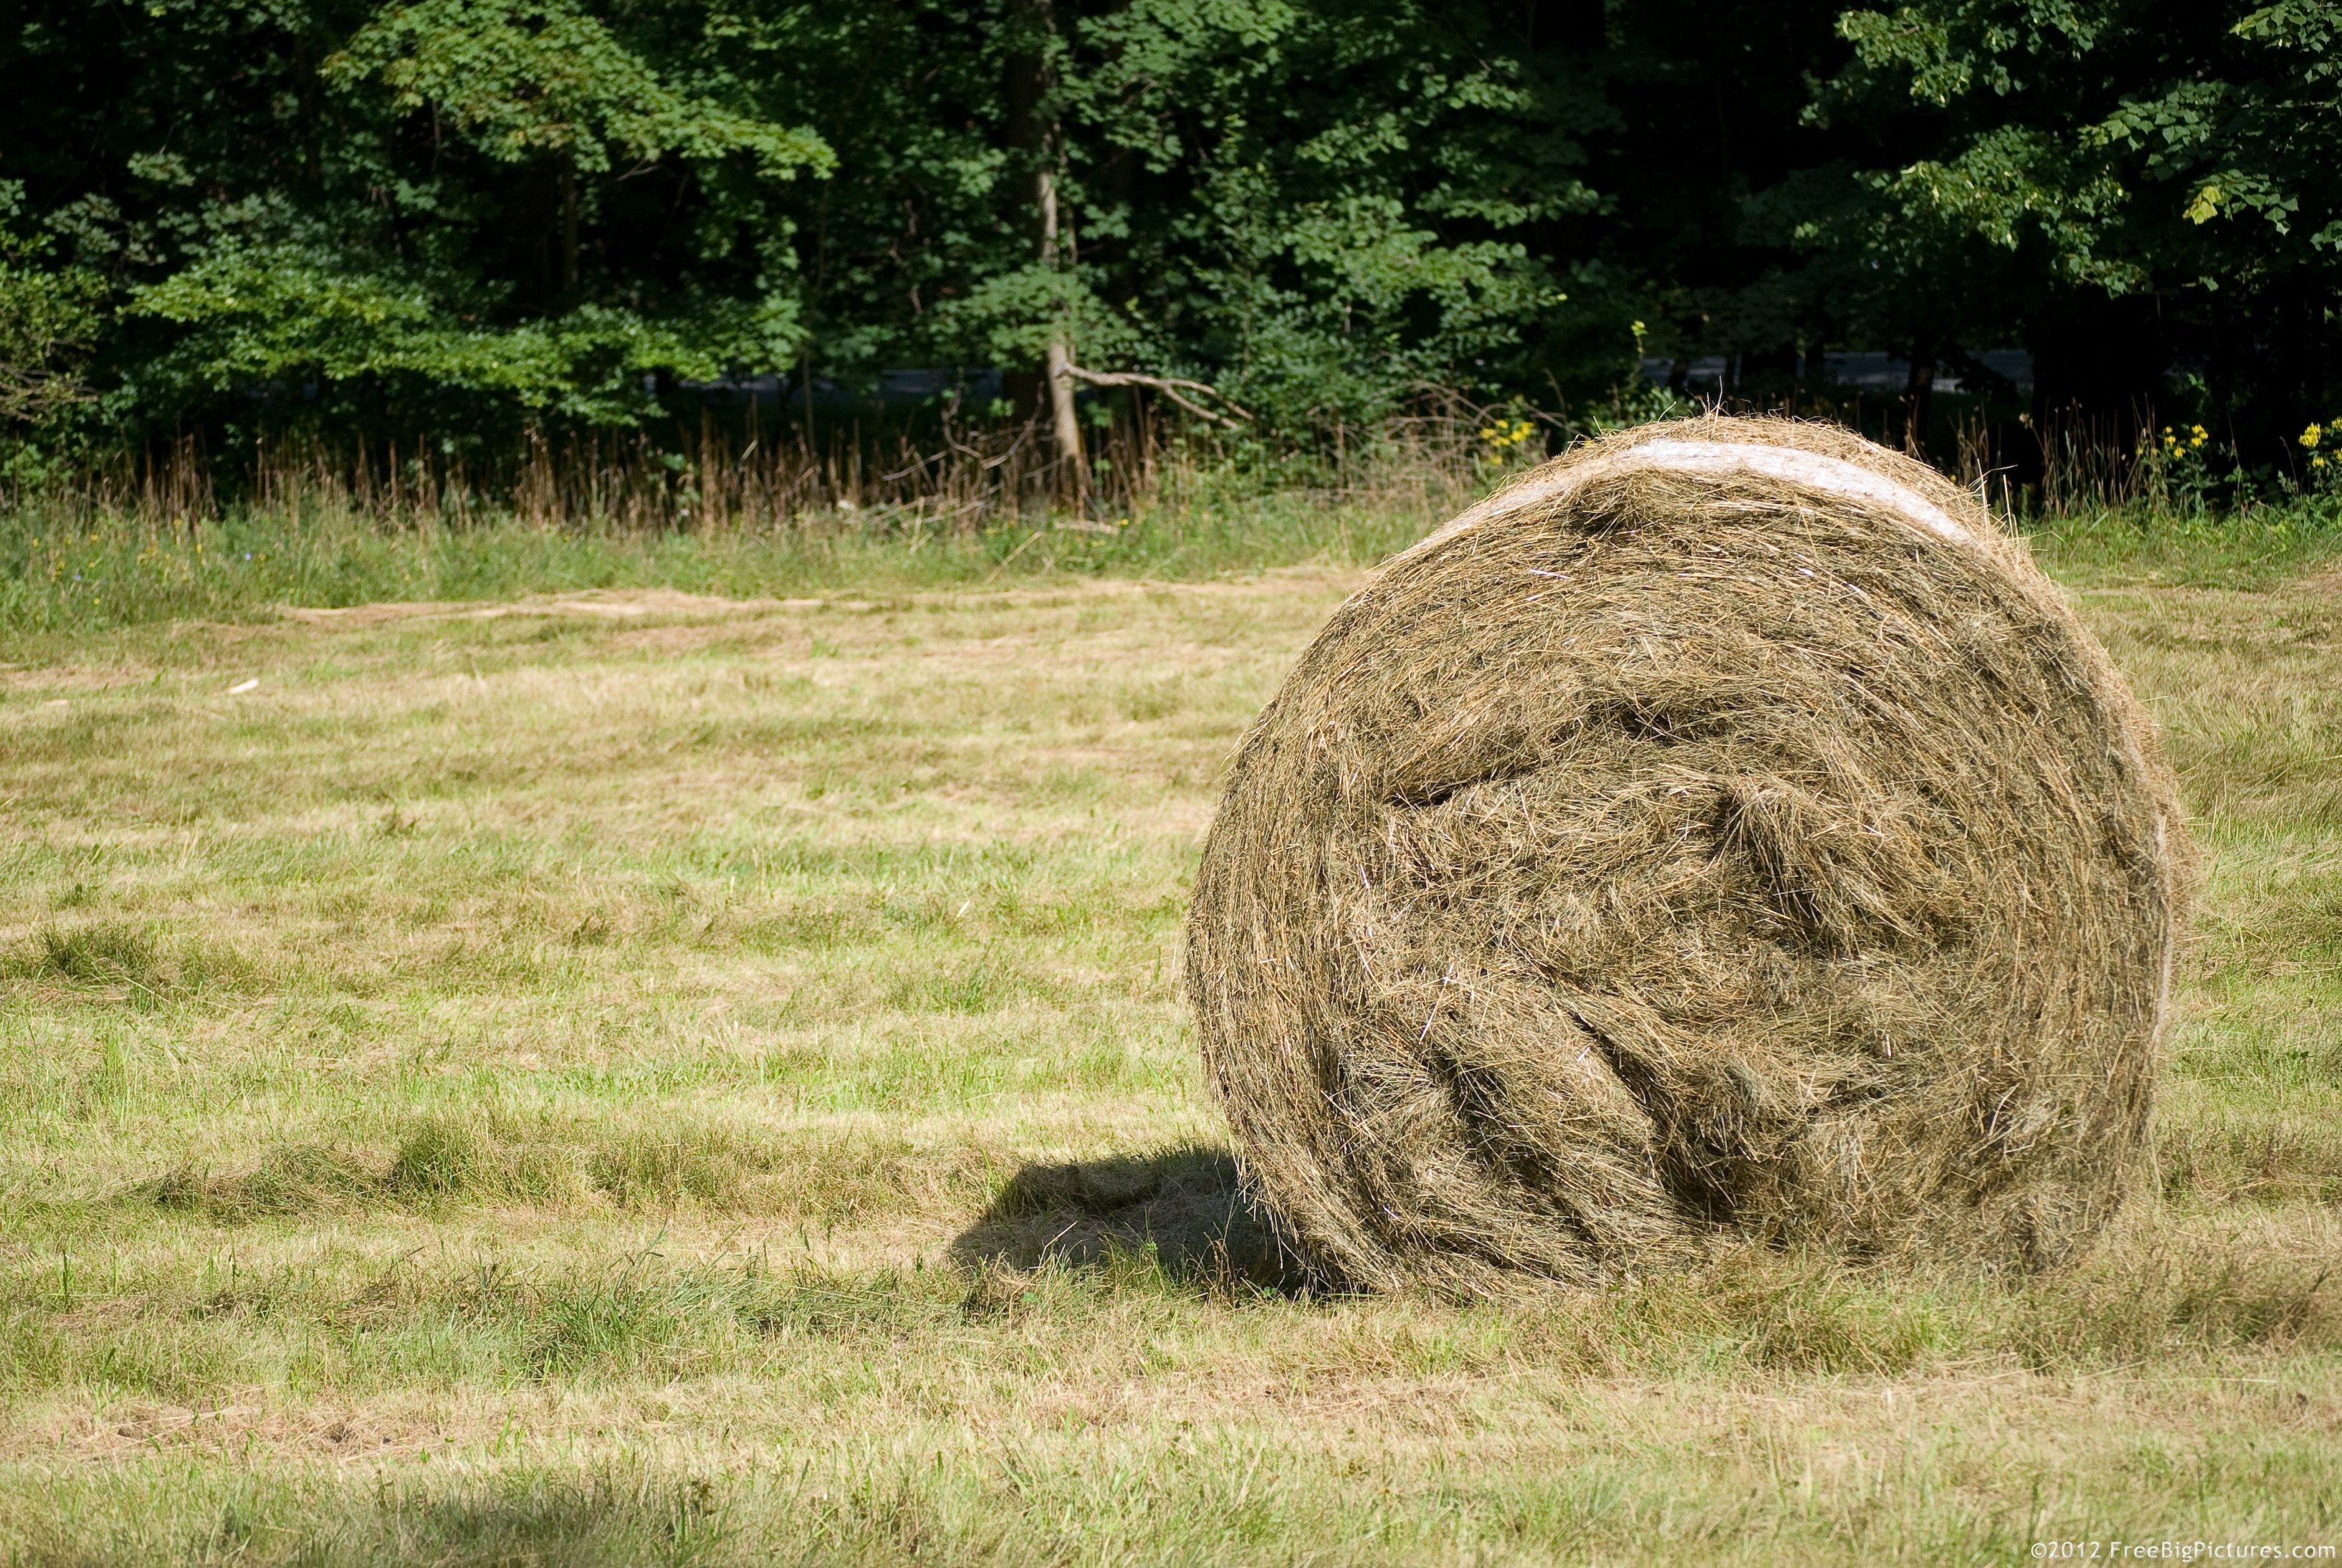 A Hay Roll waiting to be transported